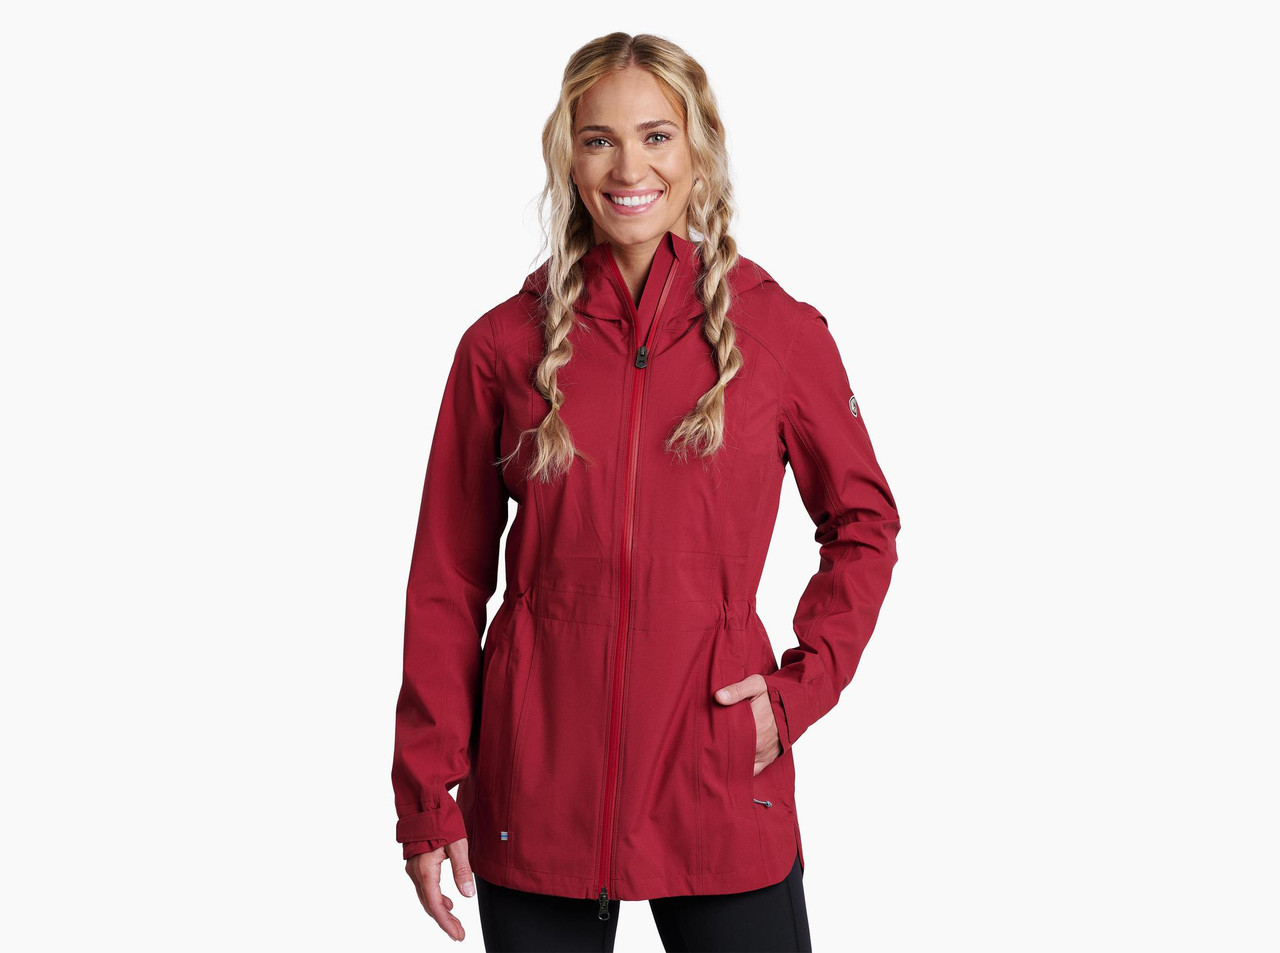 Kuhl Women's The One Jacket in Cardinal Red Color- New w/original Tags